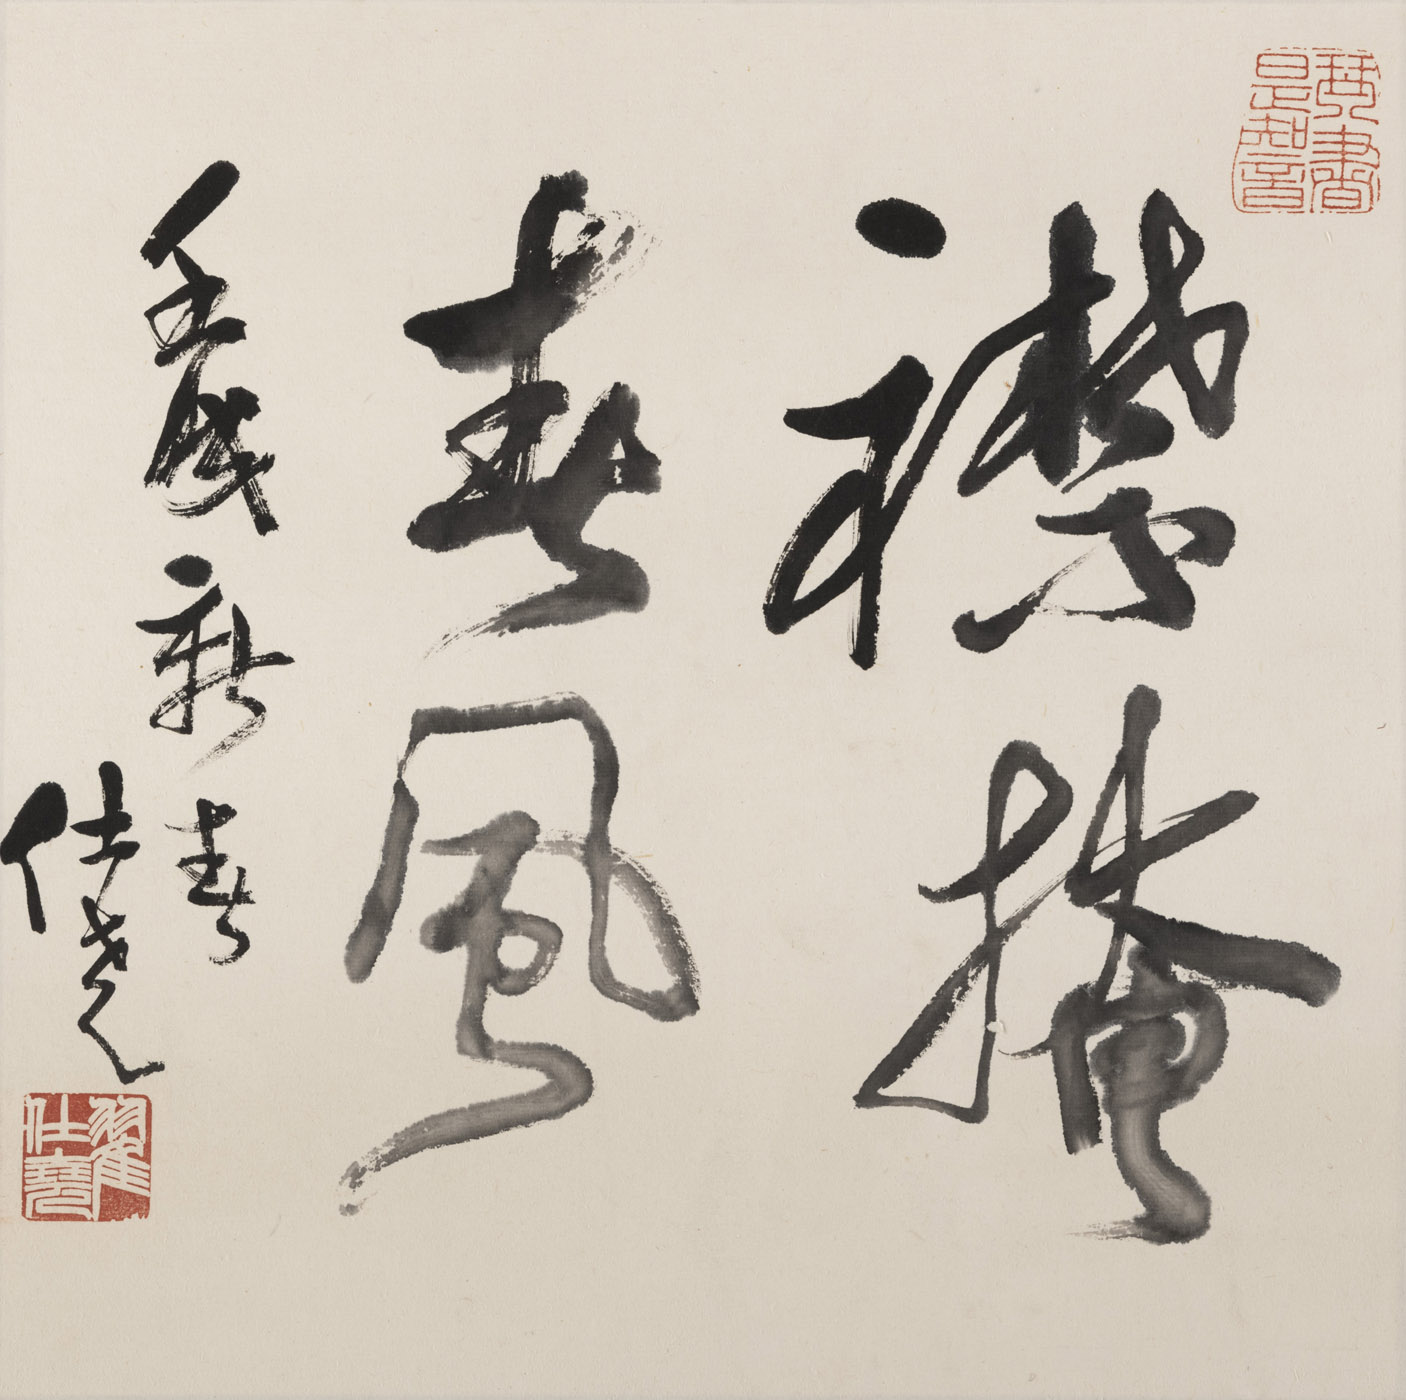 <b>JAT SEE-YEU (ZHAI SHIYAO) (1935-2009): TWO CALLIGRAPHIES IN RUNNING SCRIPT, INK ON PAPER</b>